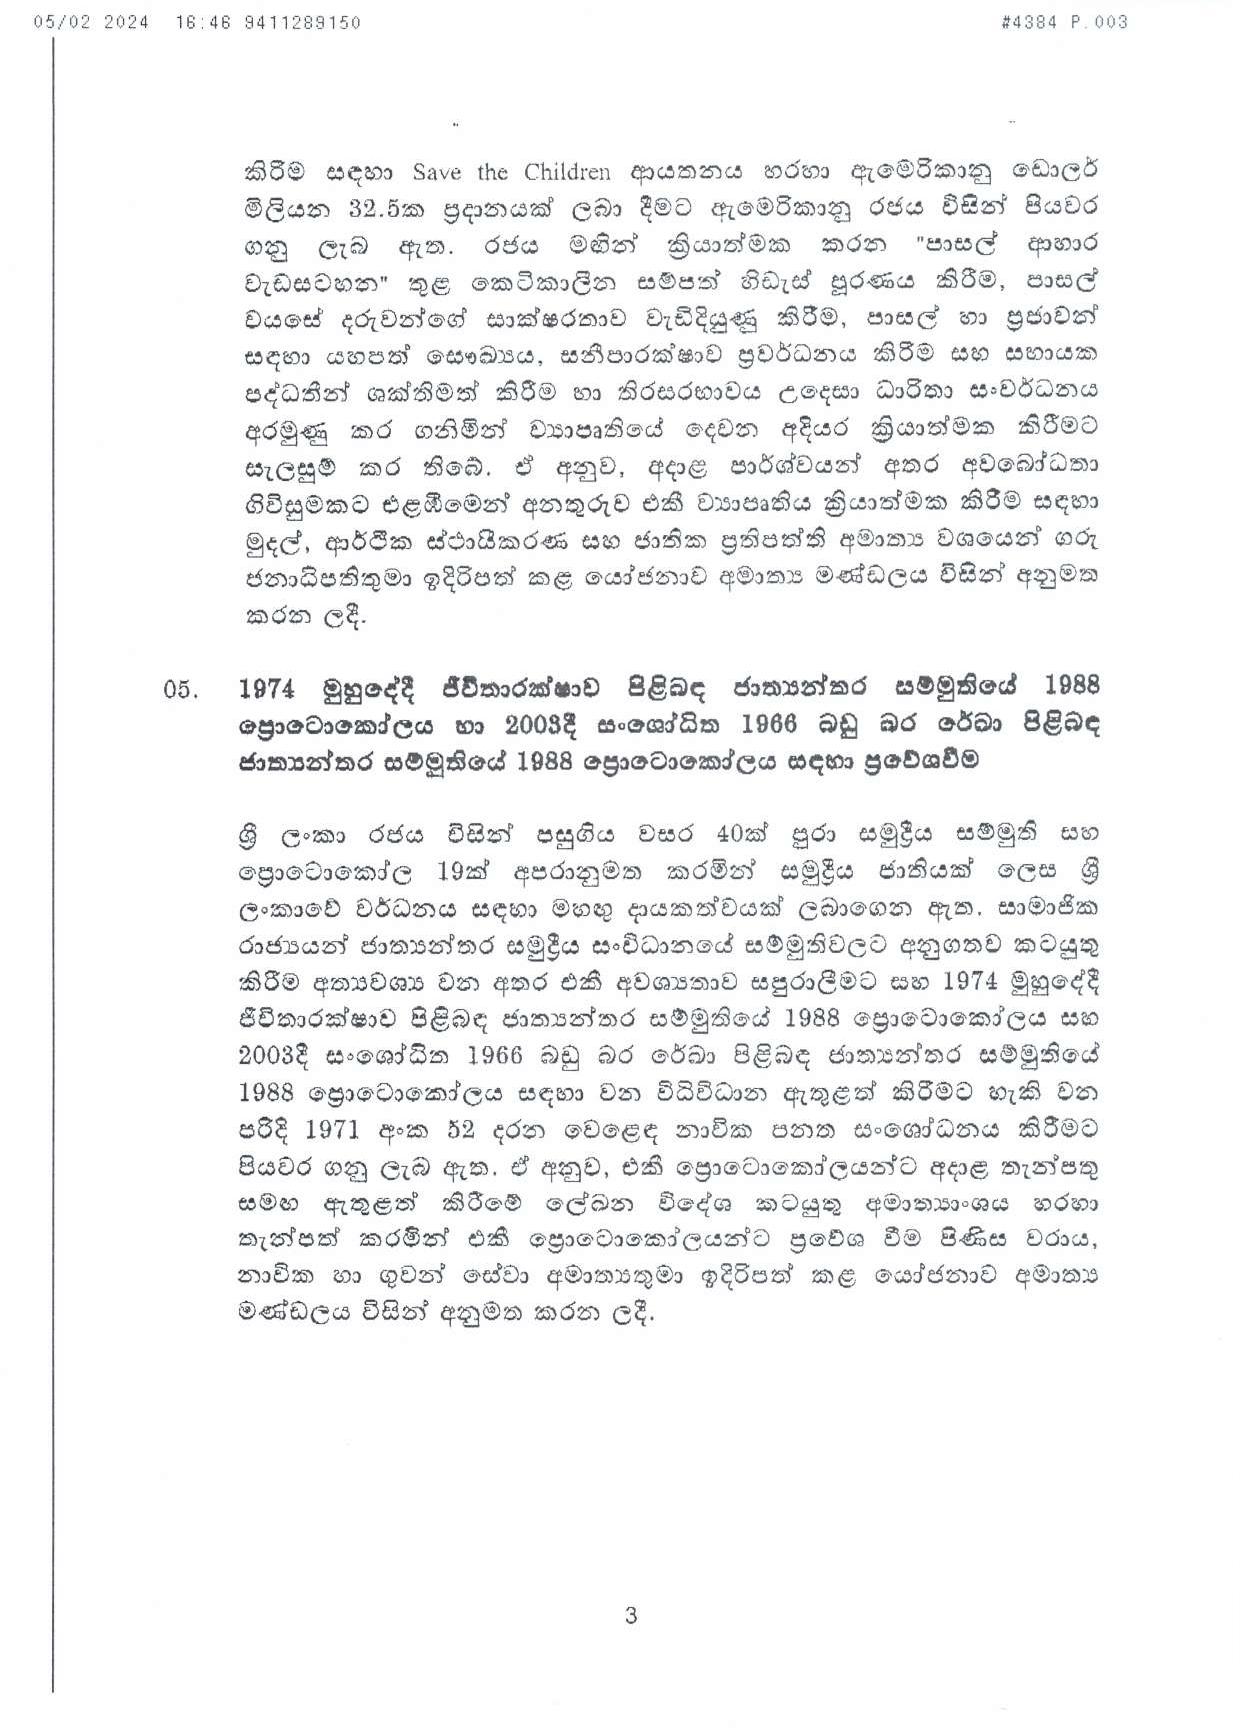 Cabinet Decision on 05.02.2024 page 003